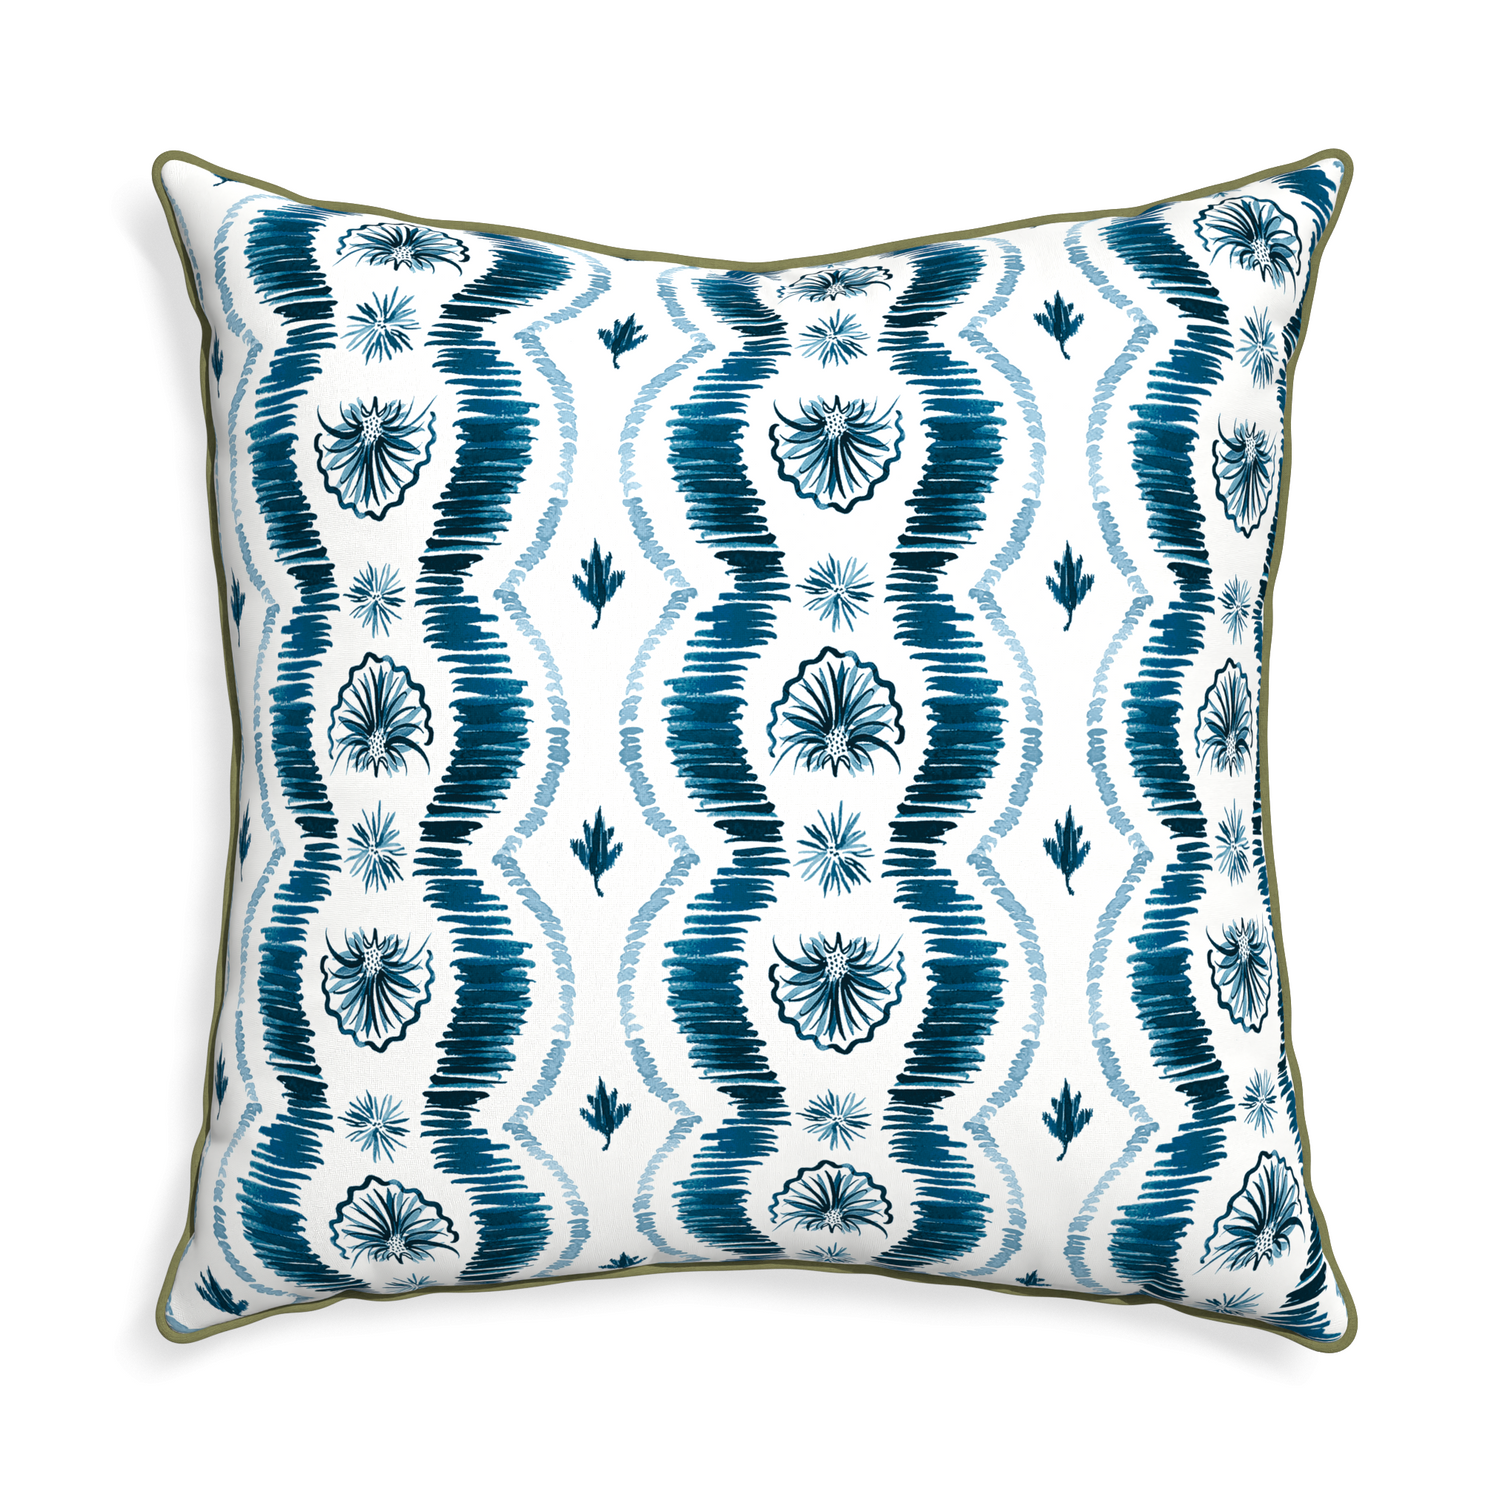 Euro-sham alice custom blue ikatpillow with moss piping on white background